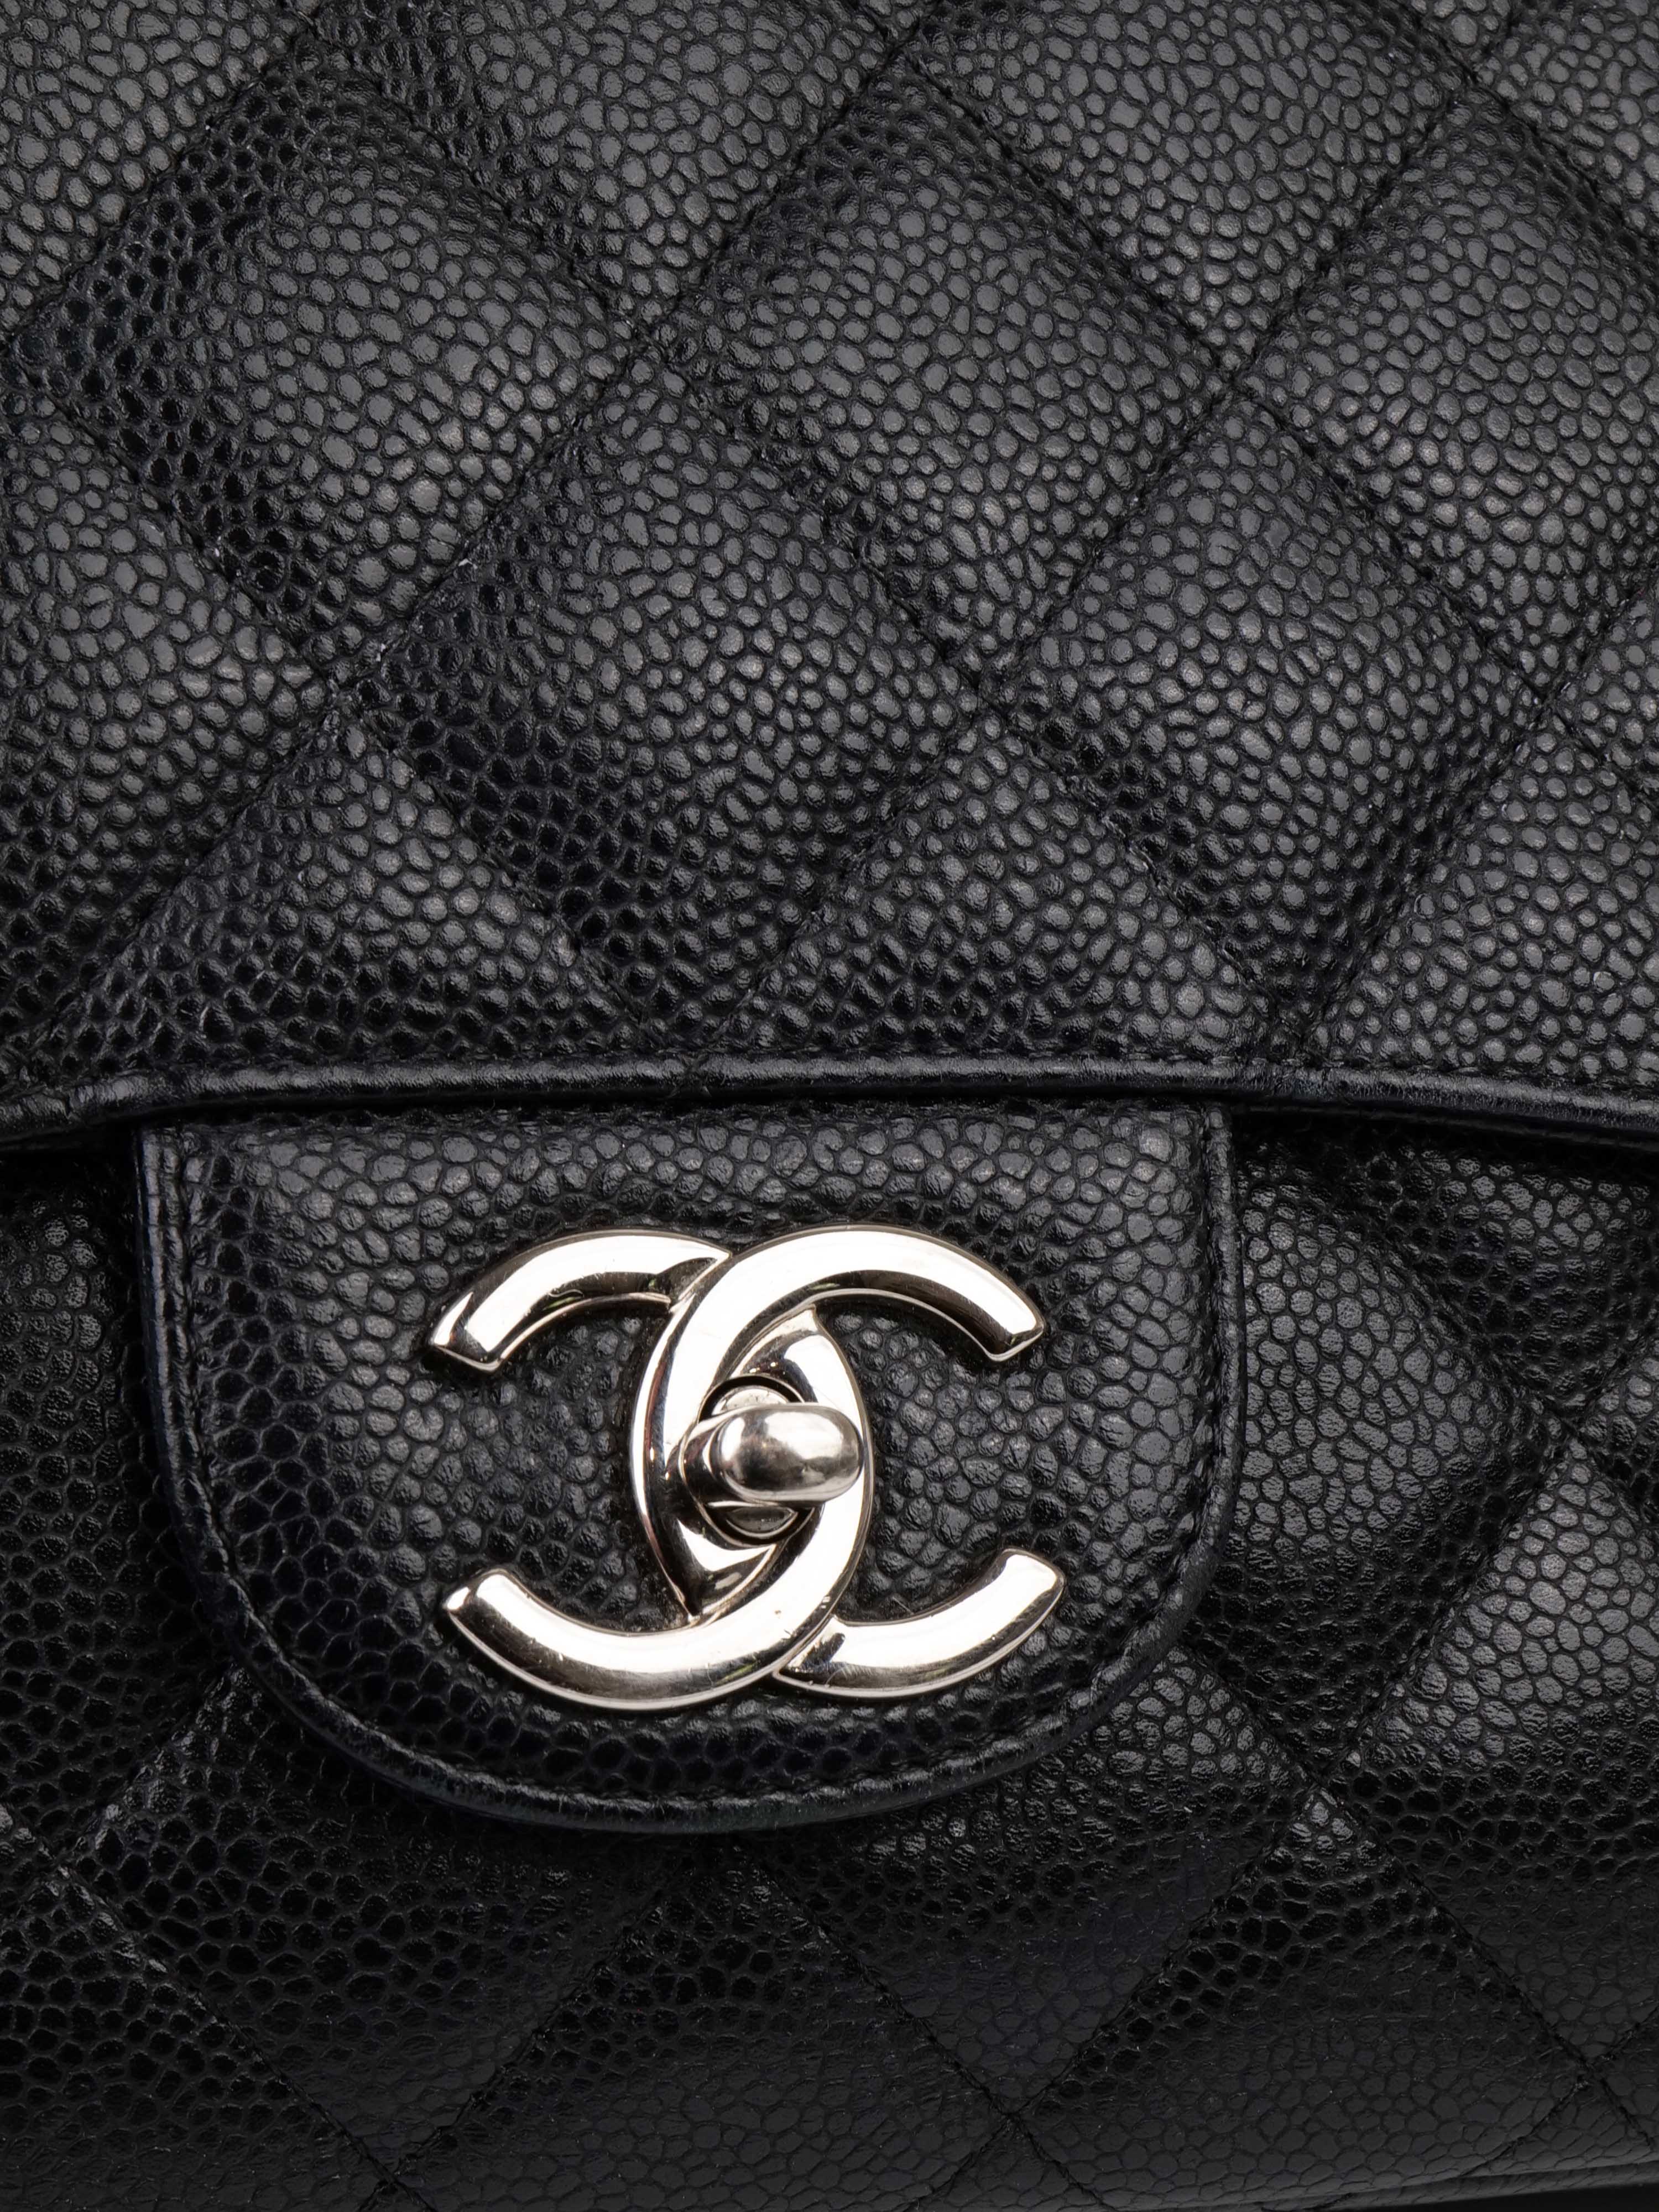 Chanel Maxi Double Flap Bag with SHW.